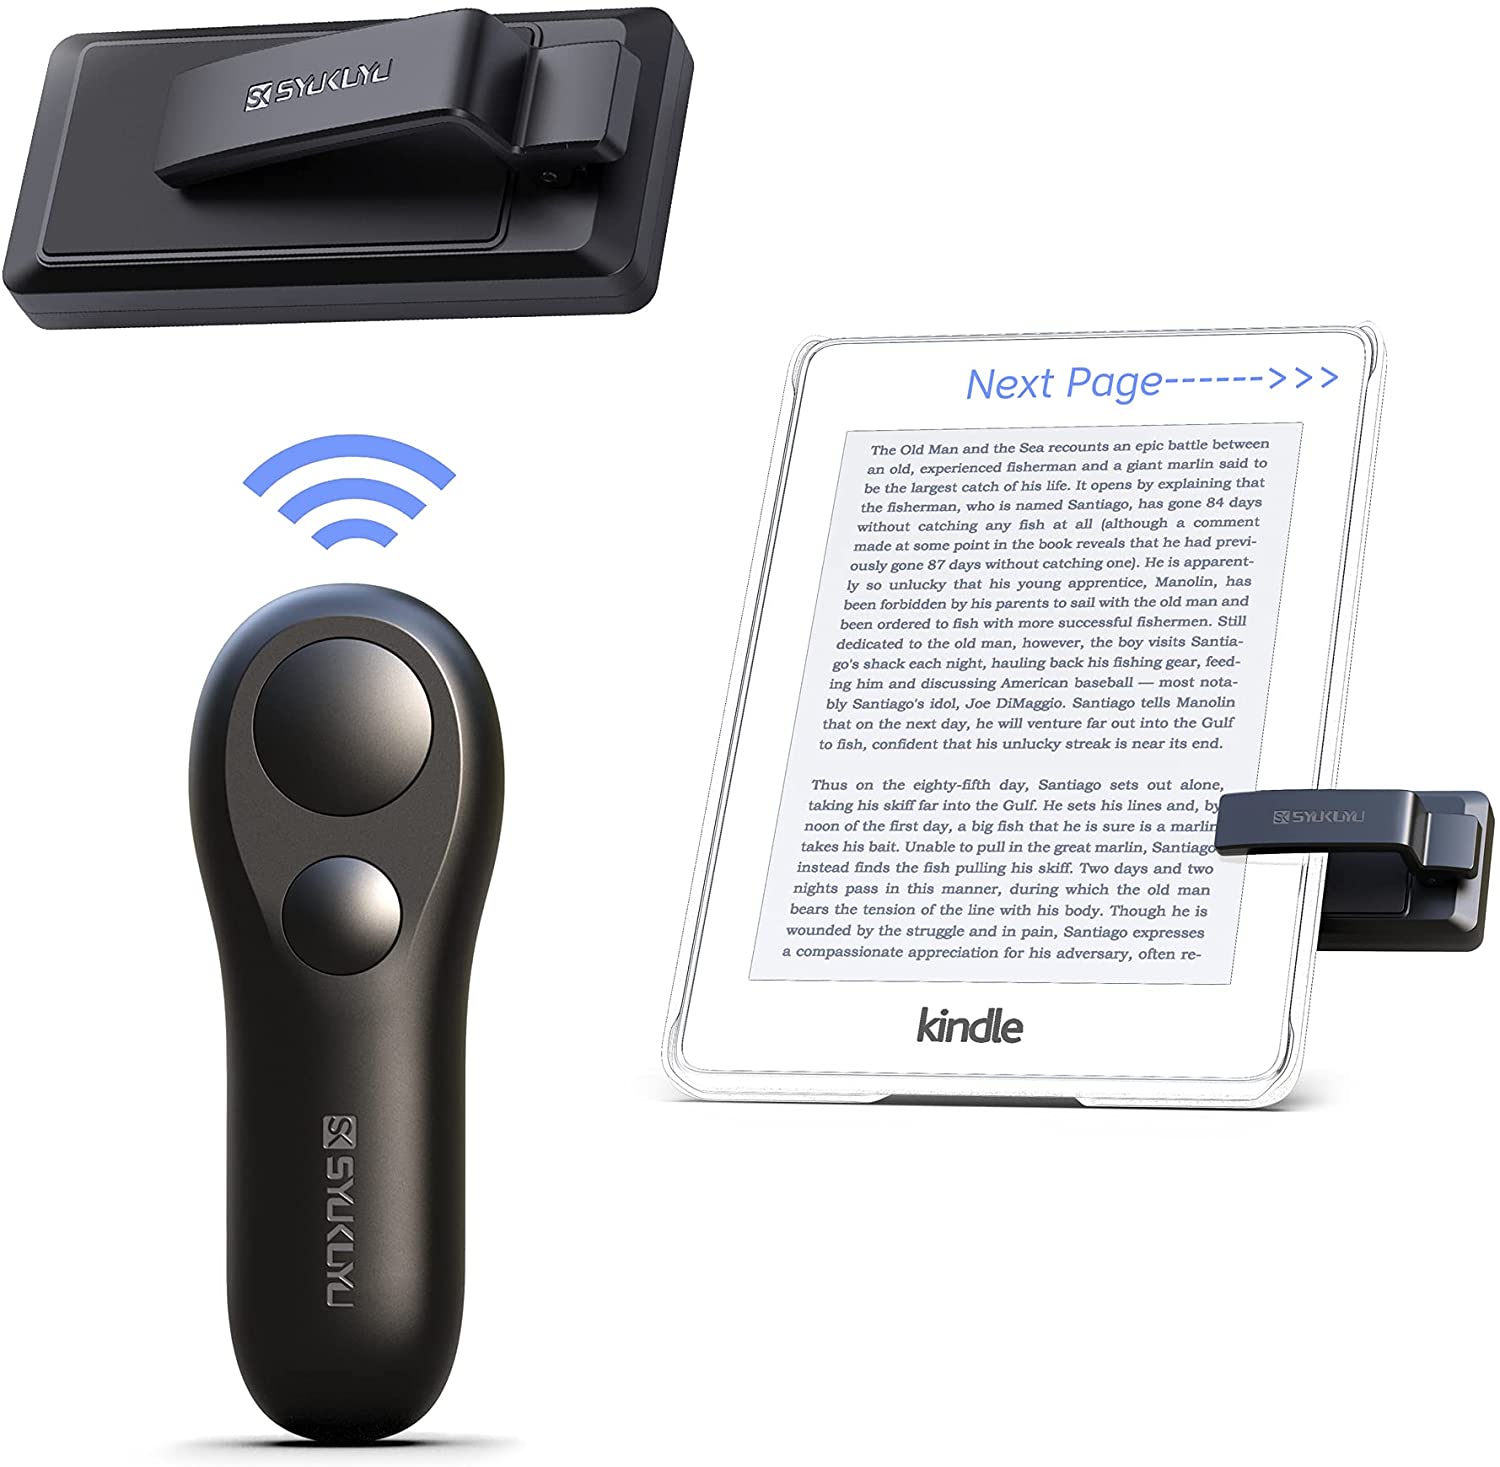 Page control. Tablet Remote. Bluetooth Page Turner.